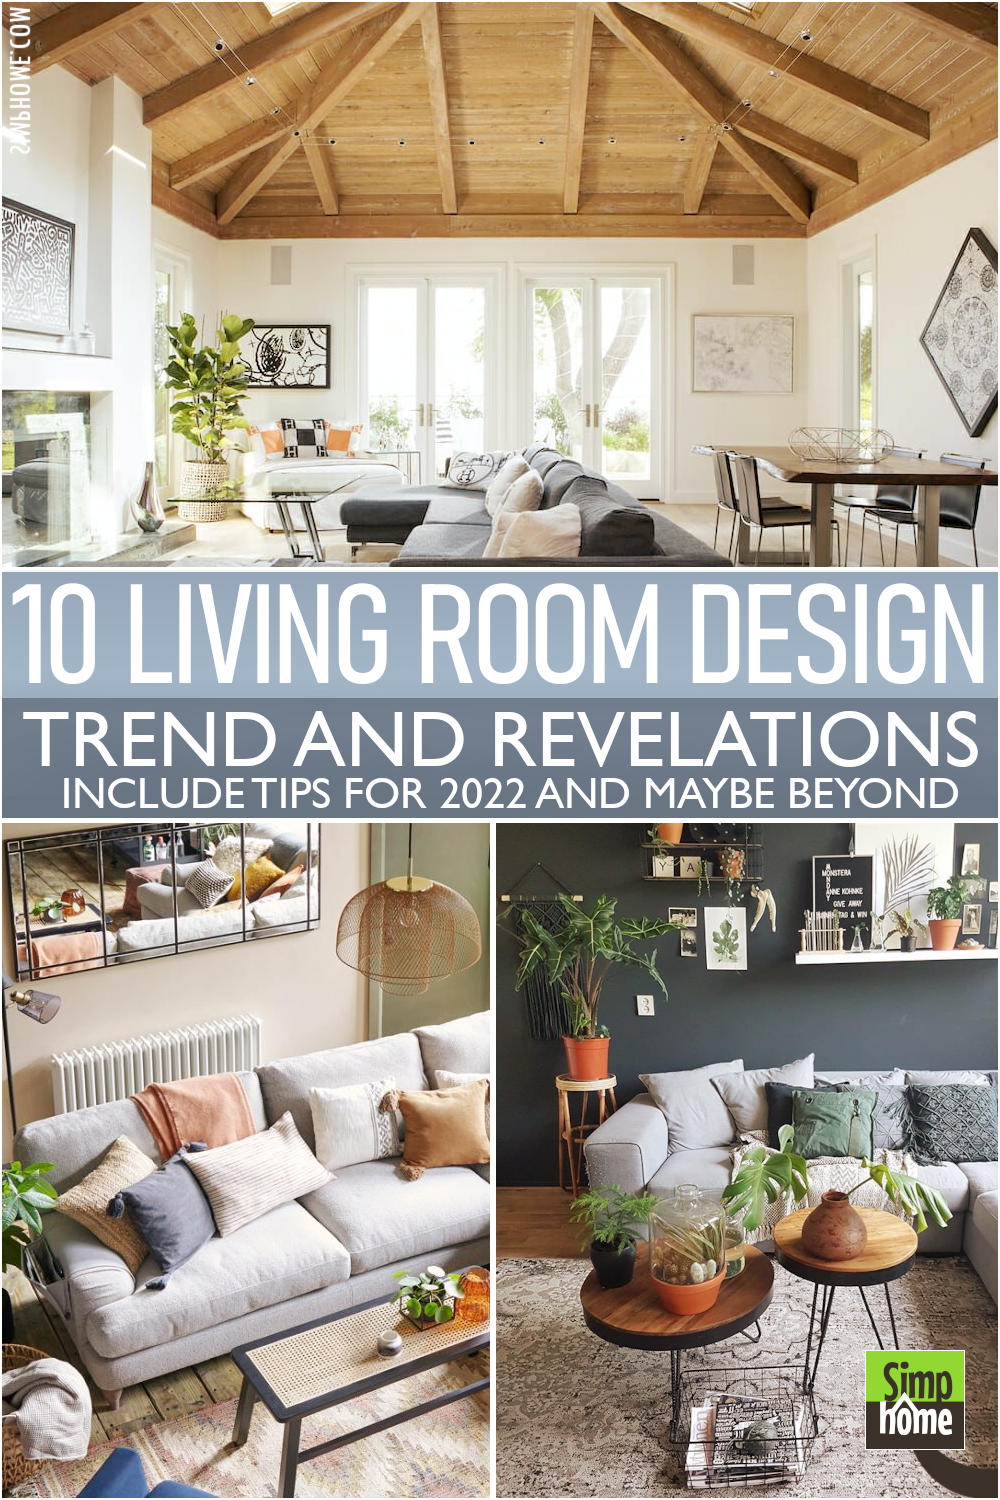 The 10 Living room design trends